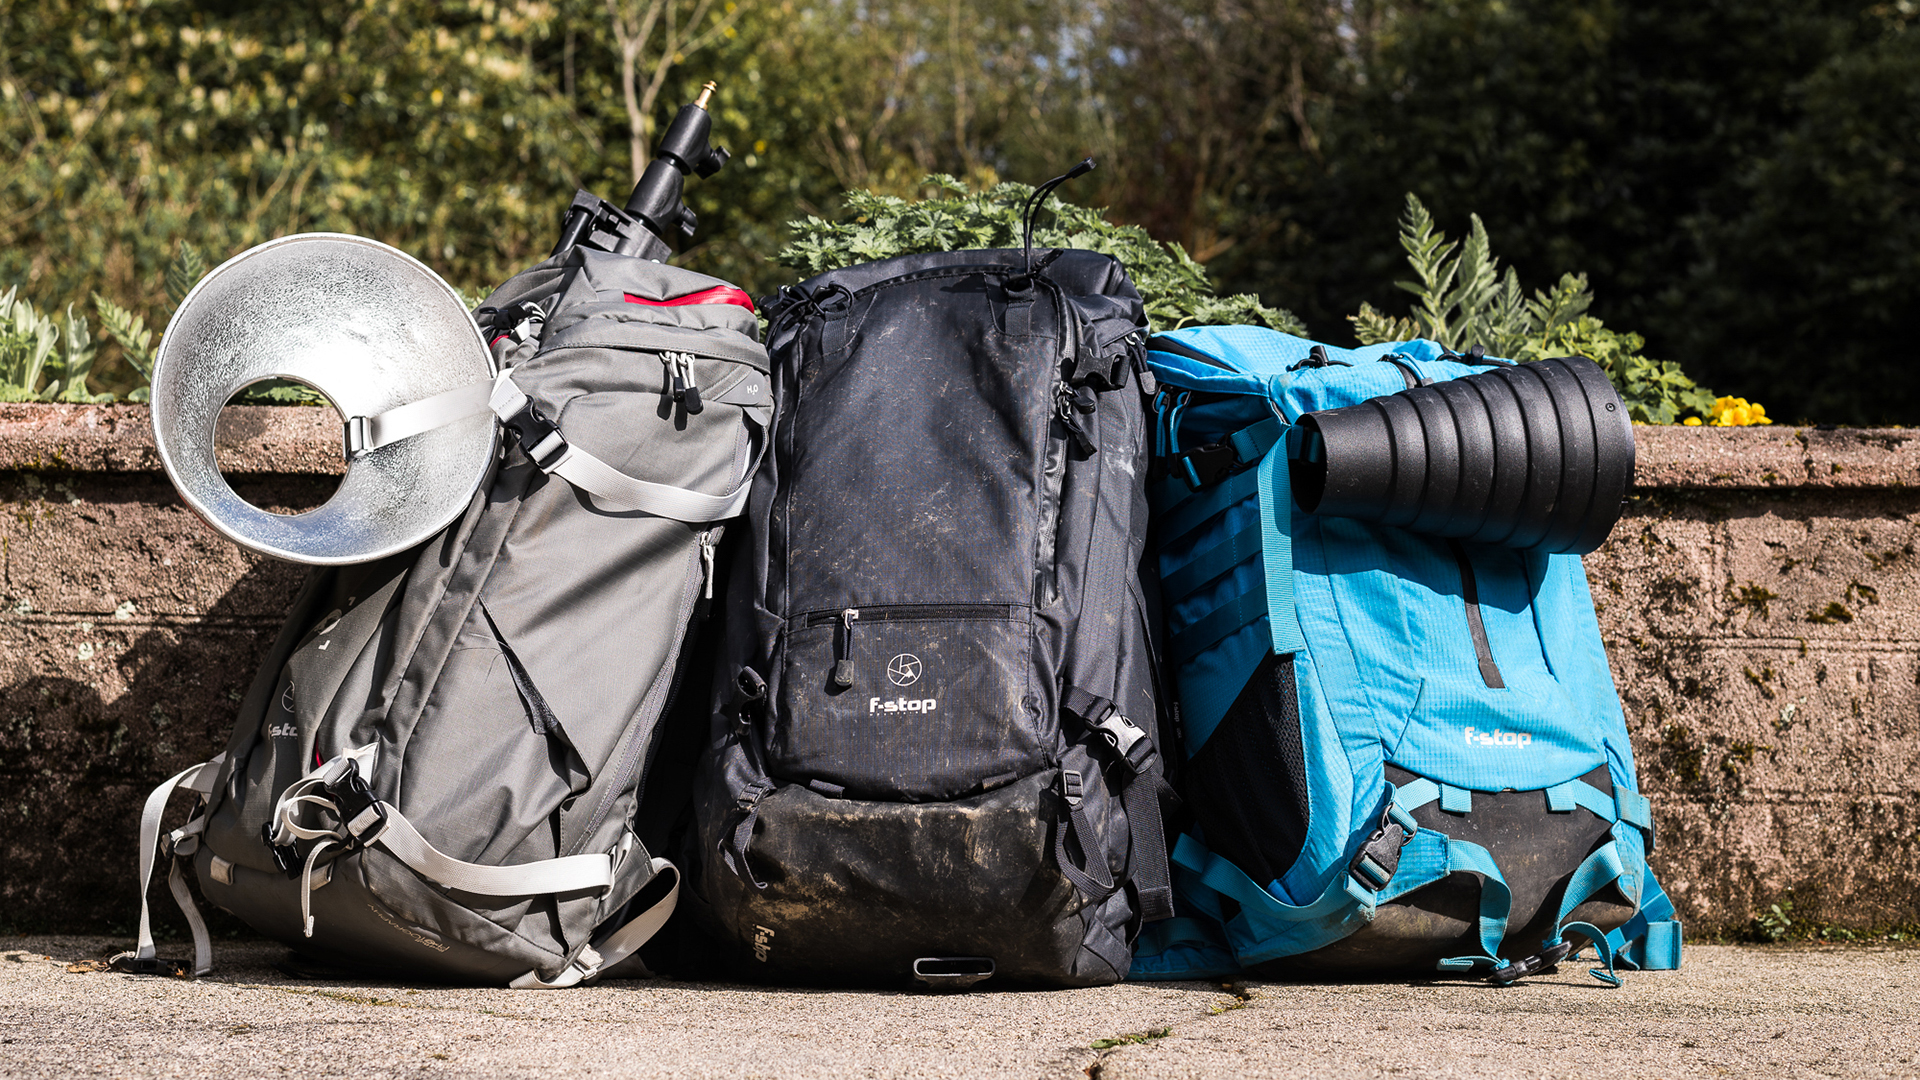 Simplifying your camera bag choices: How the pros use modular systems